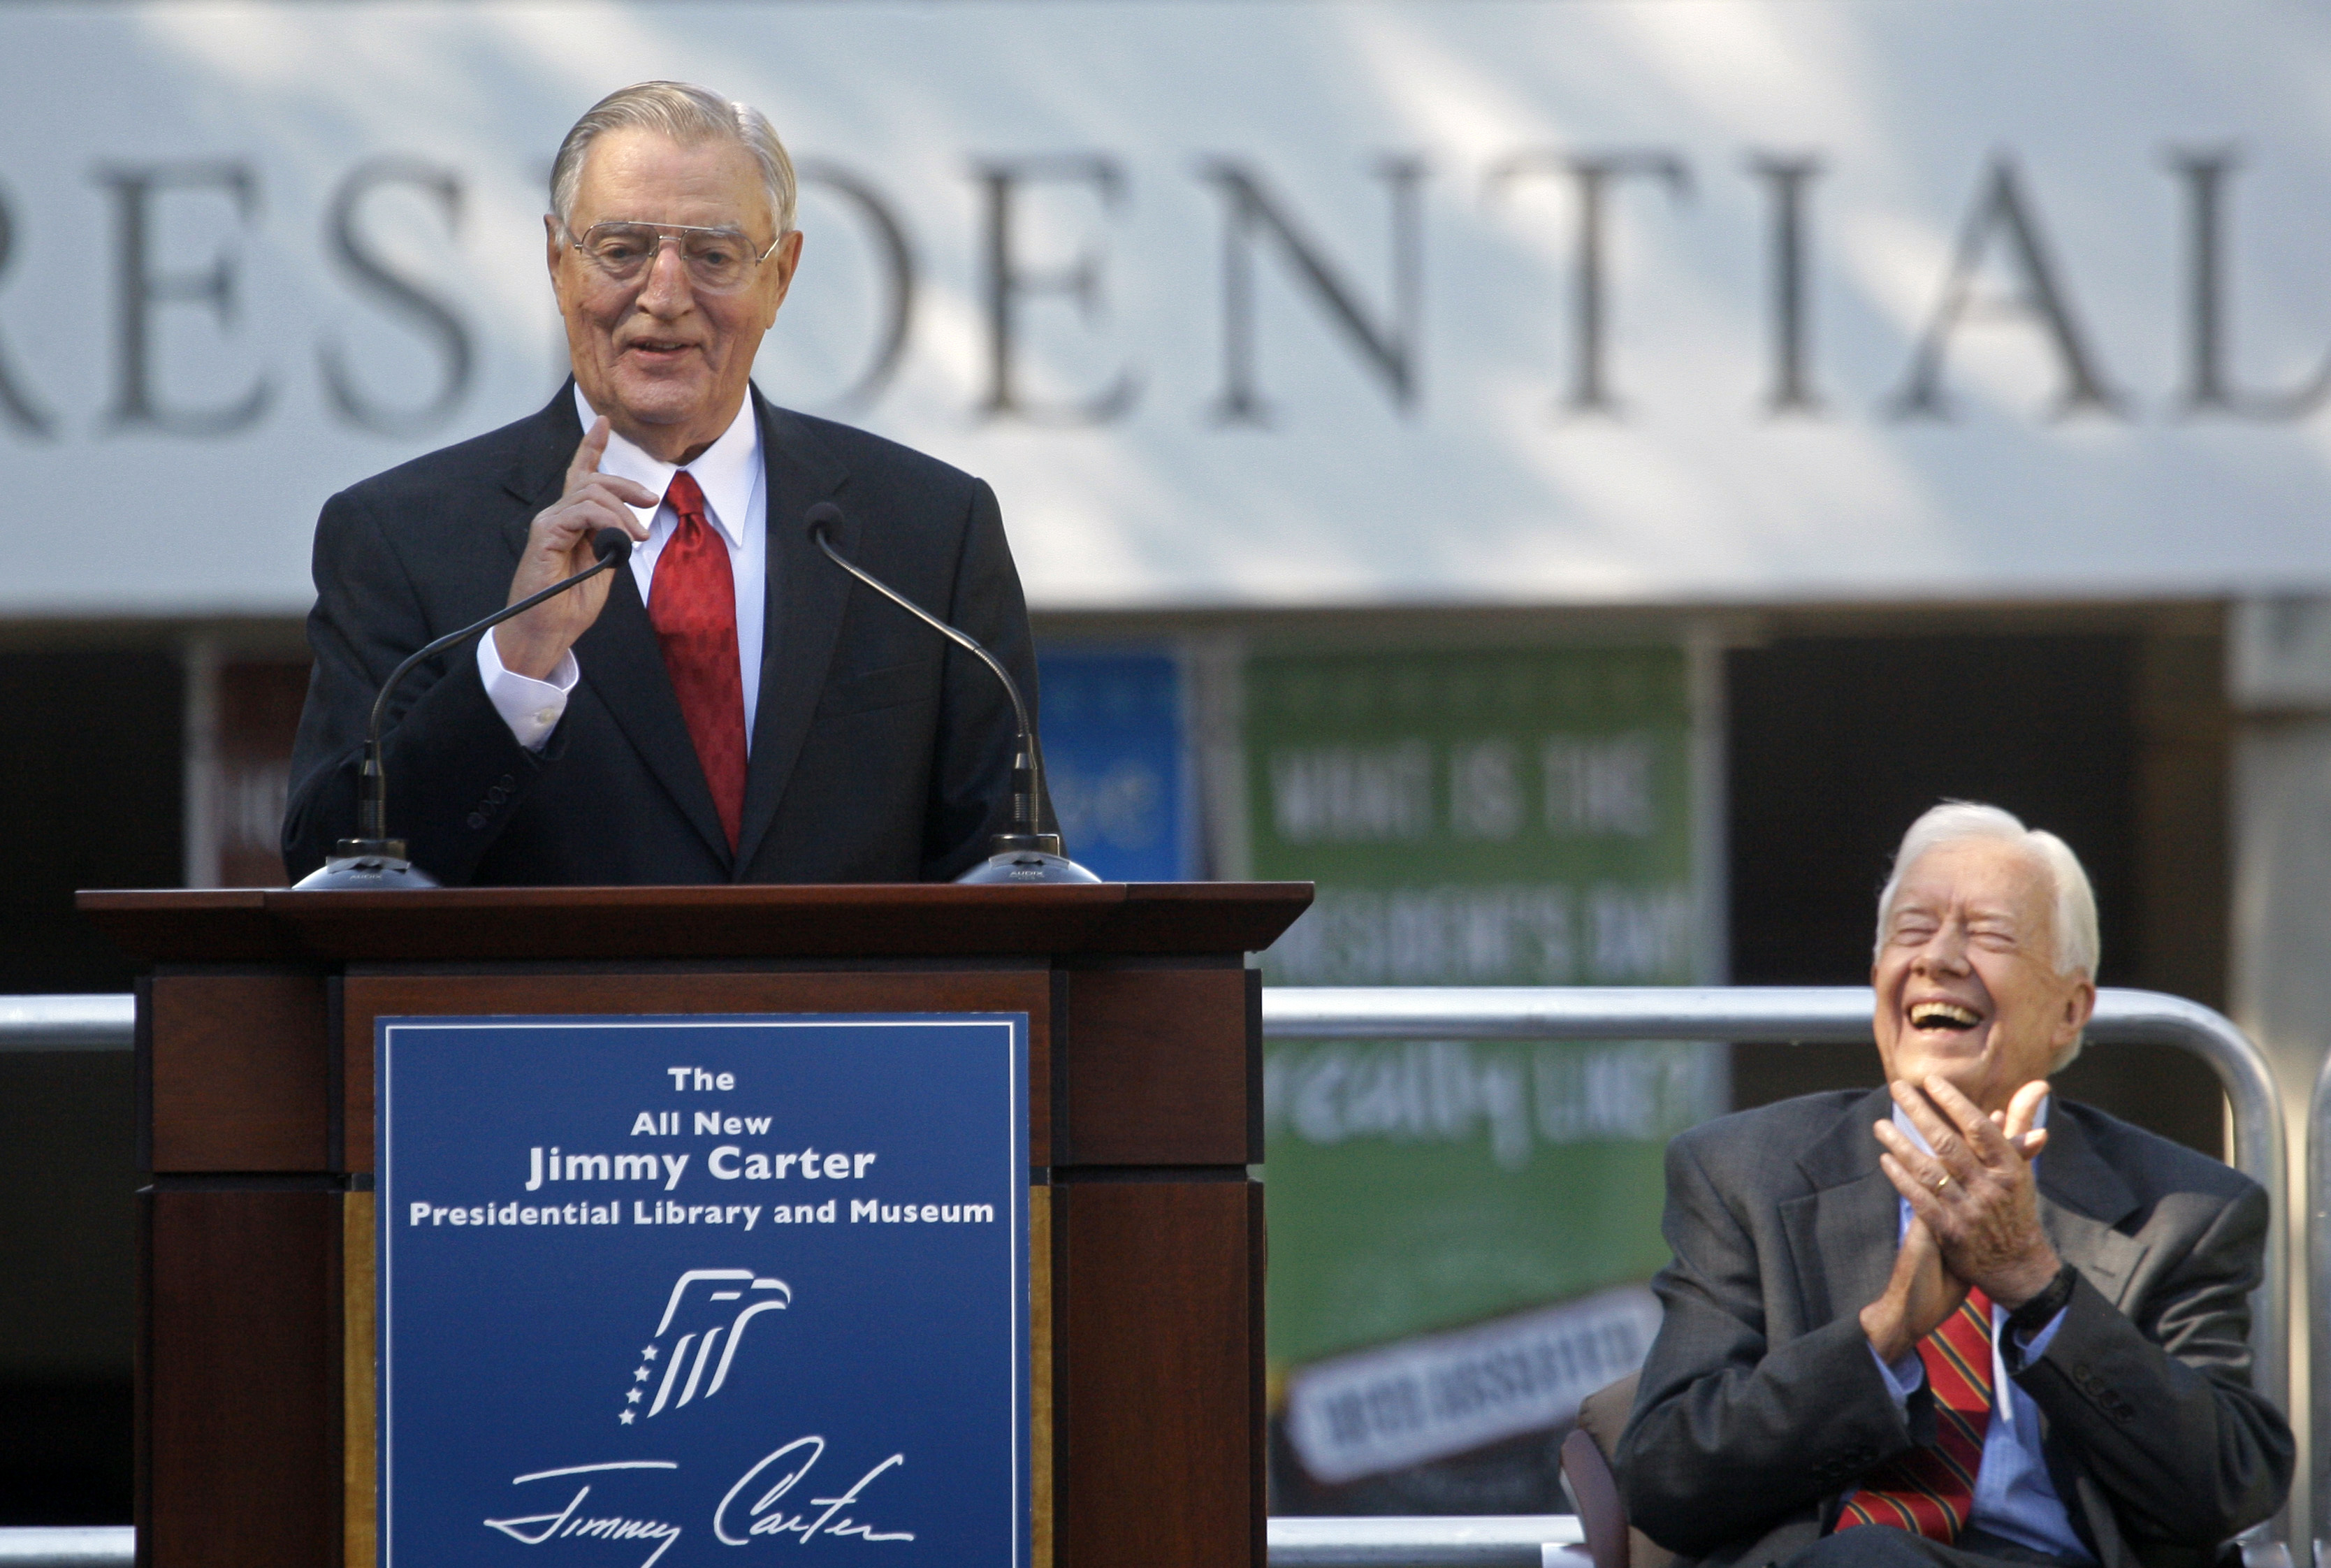 Walter Mondale and Jimmy Carter.